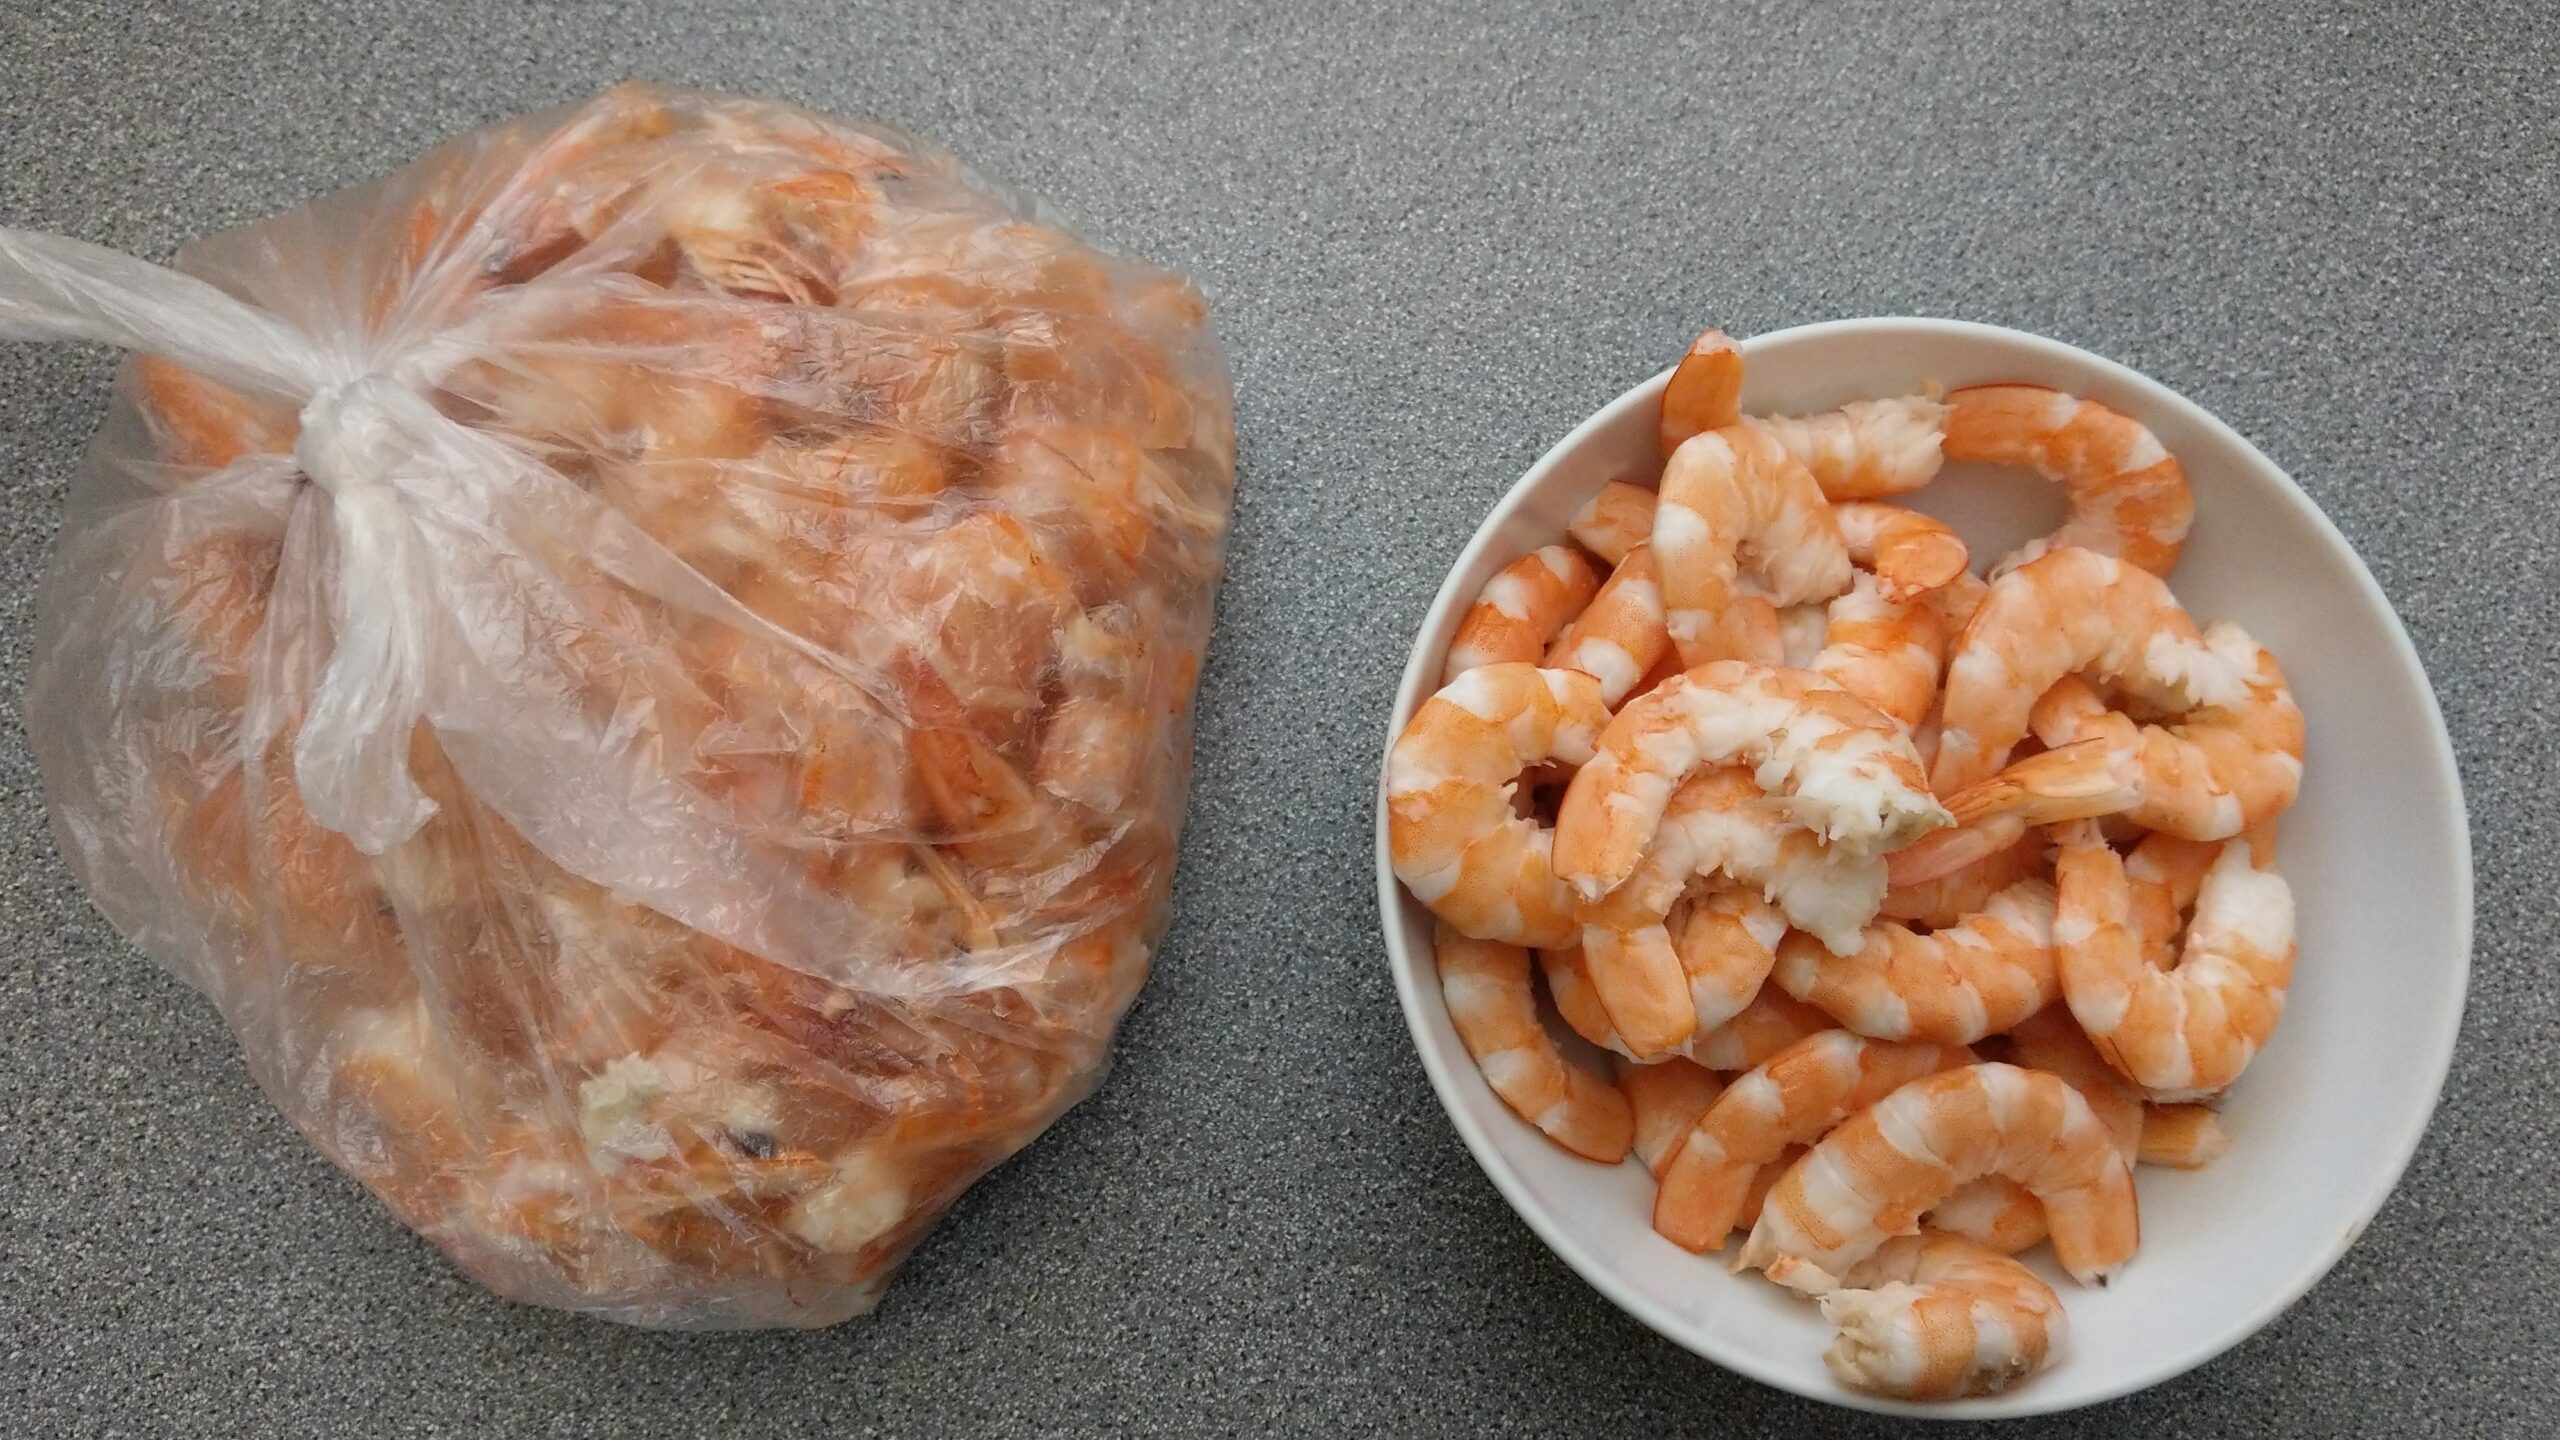 Cooked shrimp and their shells